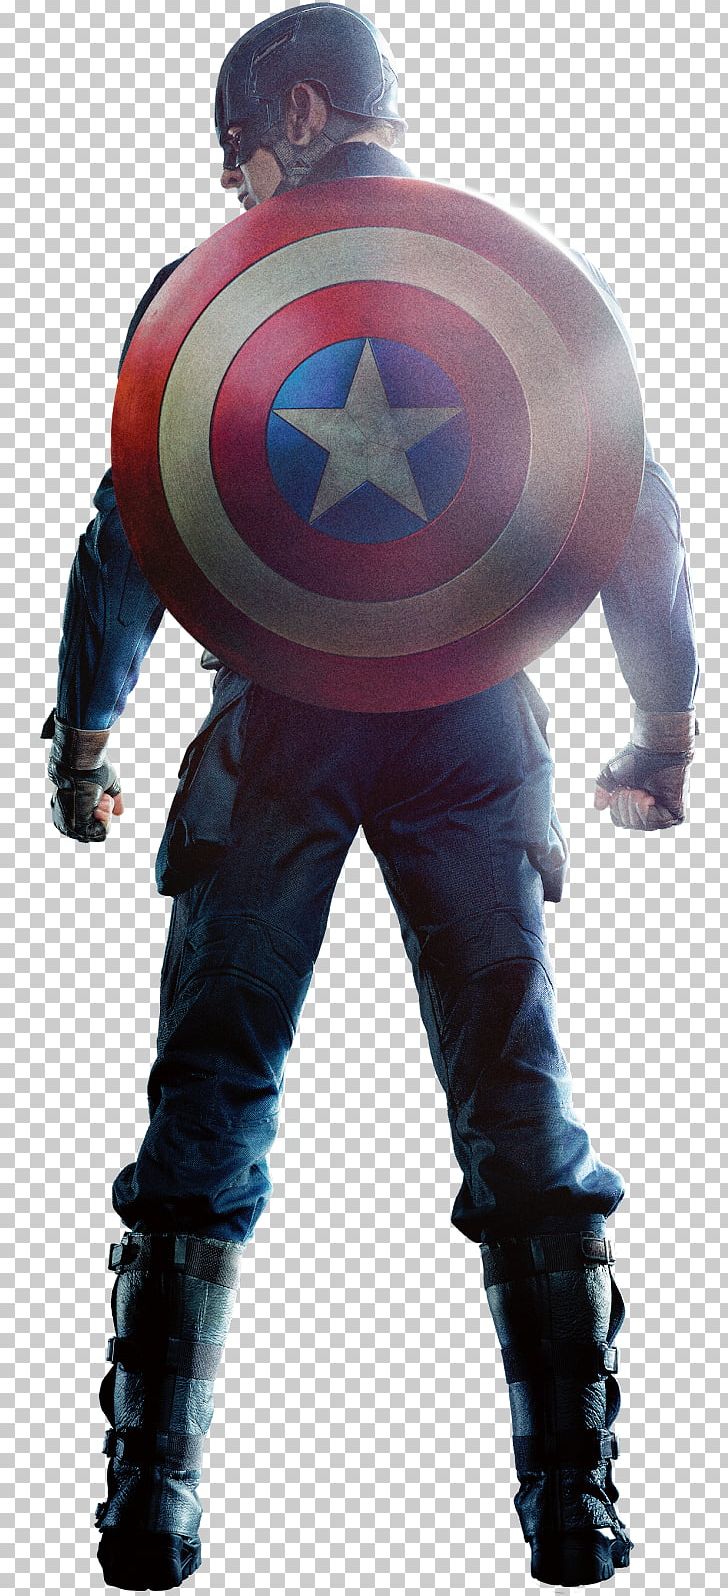 Captain America Loki Thor Black Widow Marvel Cinematic Universe PNG, Clipart, Action Figure, Black Widow, Captain America, Captain America Civil War, Captain America The First Avenger Free PNG Download